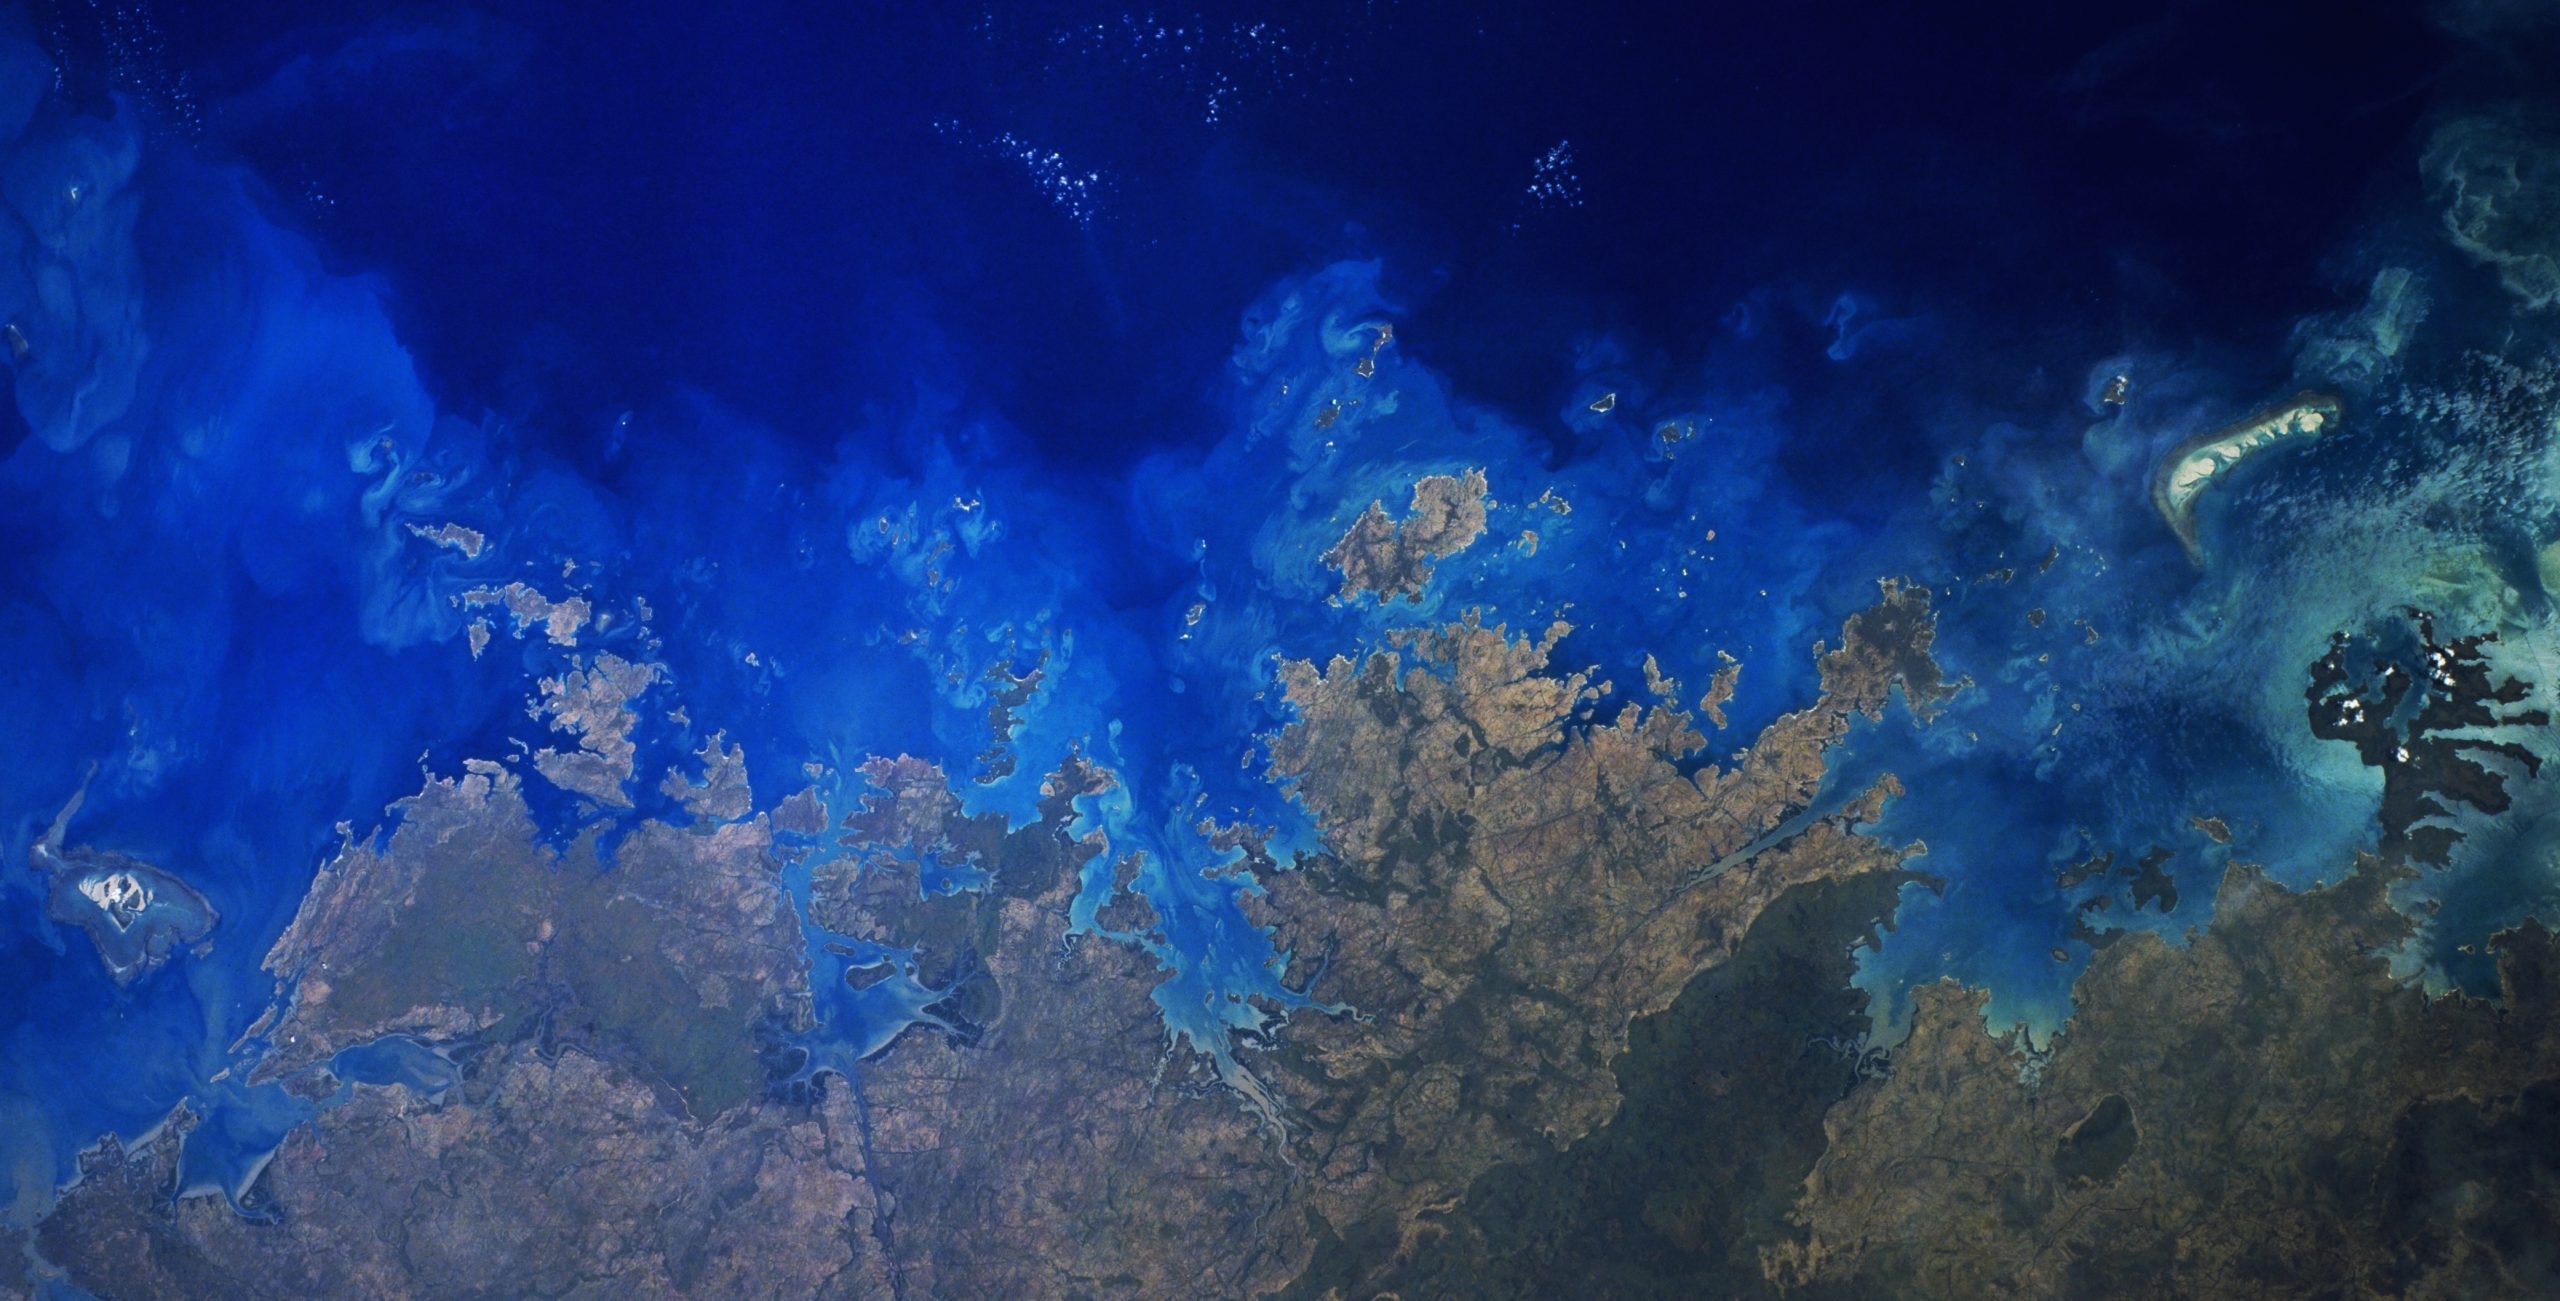 Resilient corals were discovered around a number of the small islands that make up the Bonaparte Archipelago off Western Australia. Photo by NASA